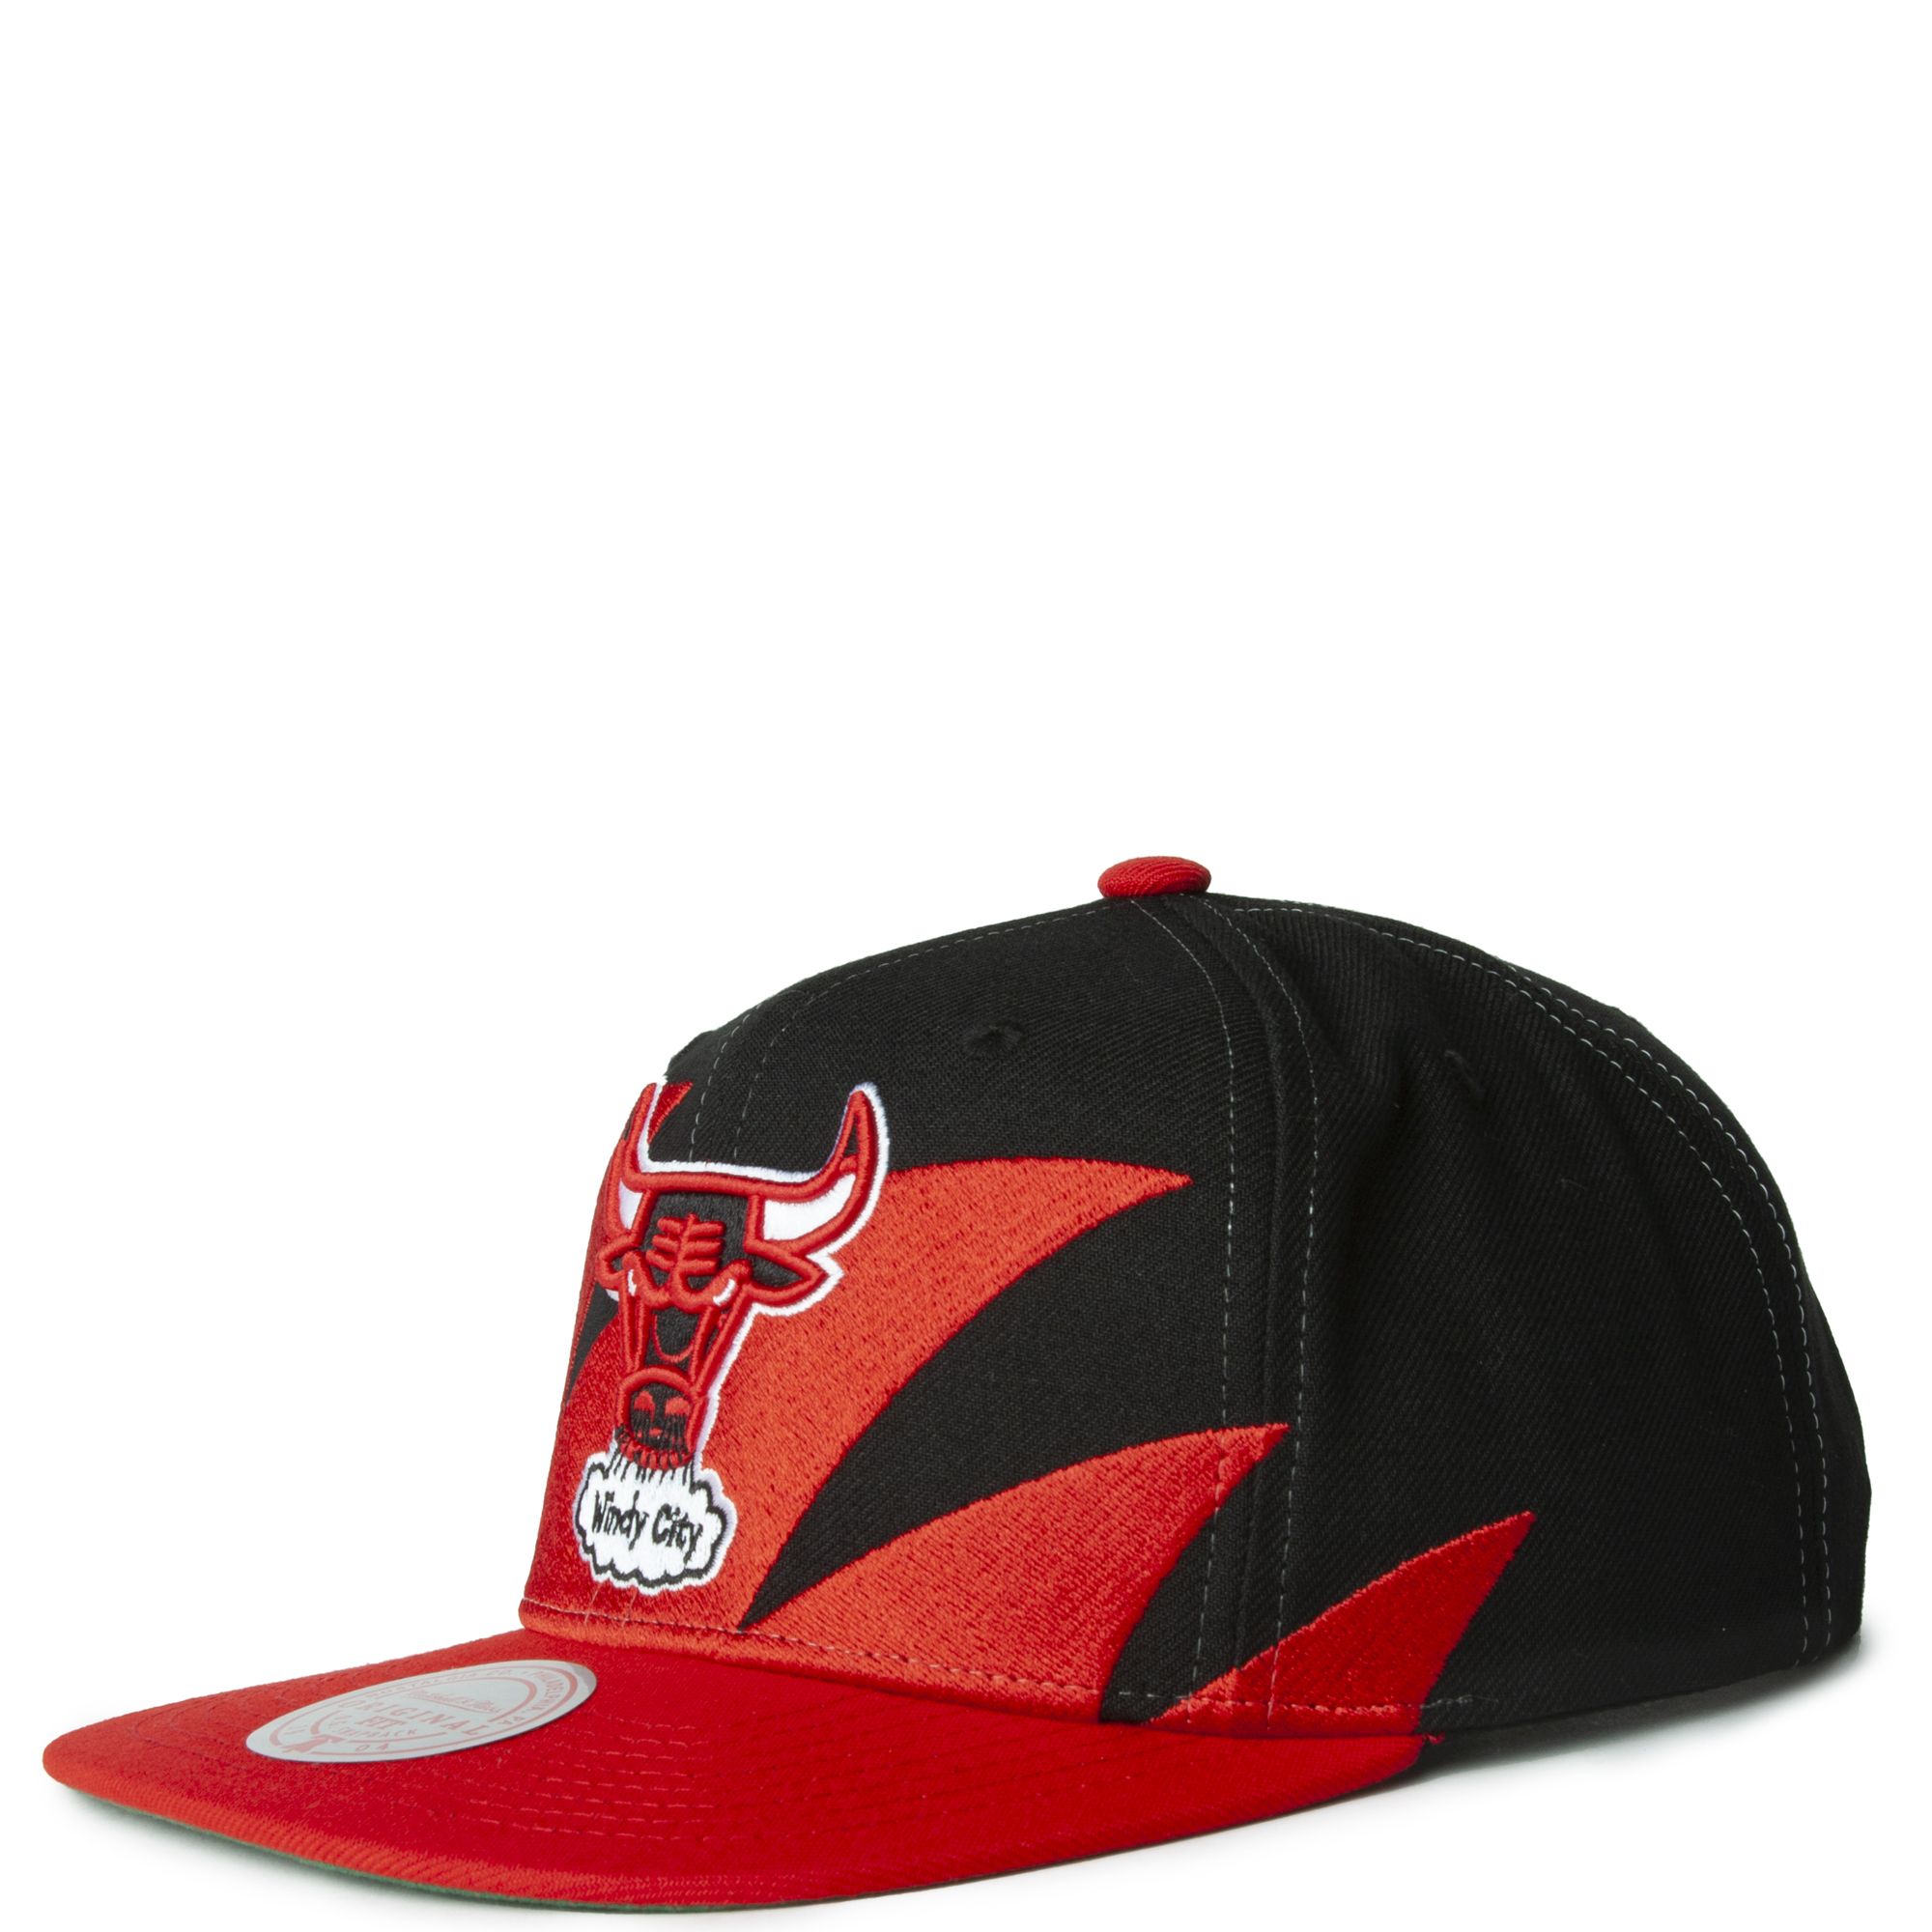 49ers shark tooth hat